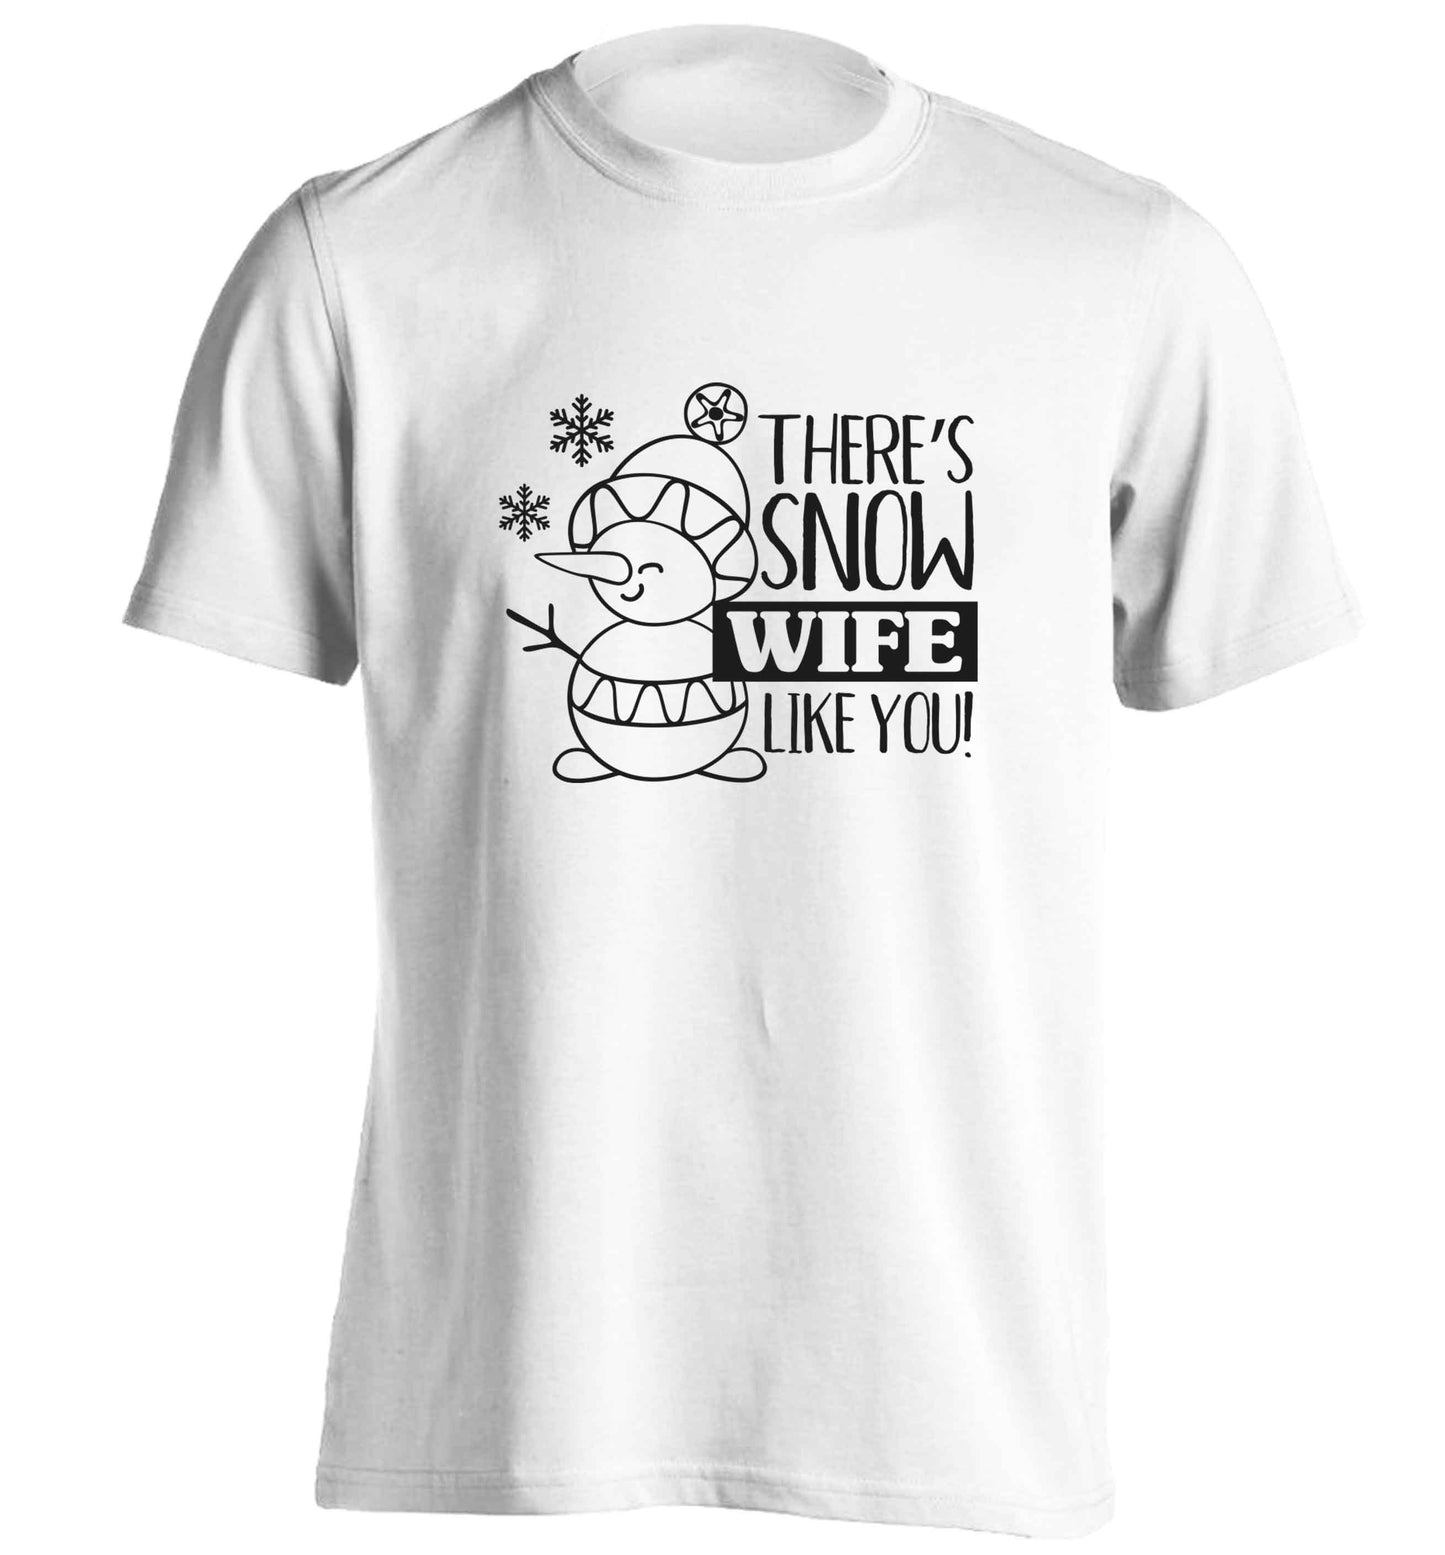 There's snow wife like you adults unisex white Tshirt 2XL